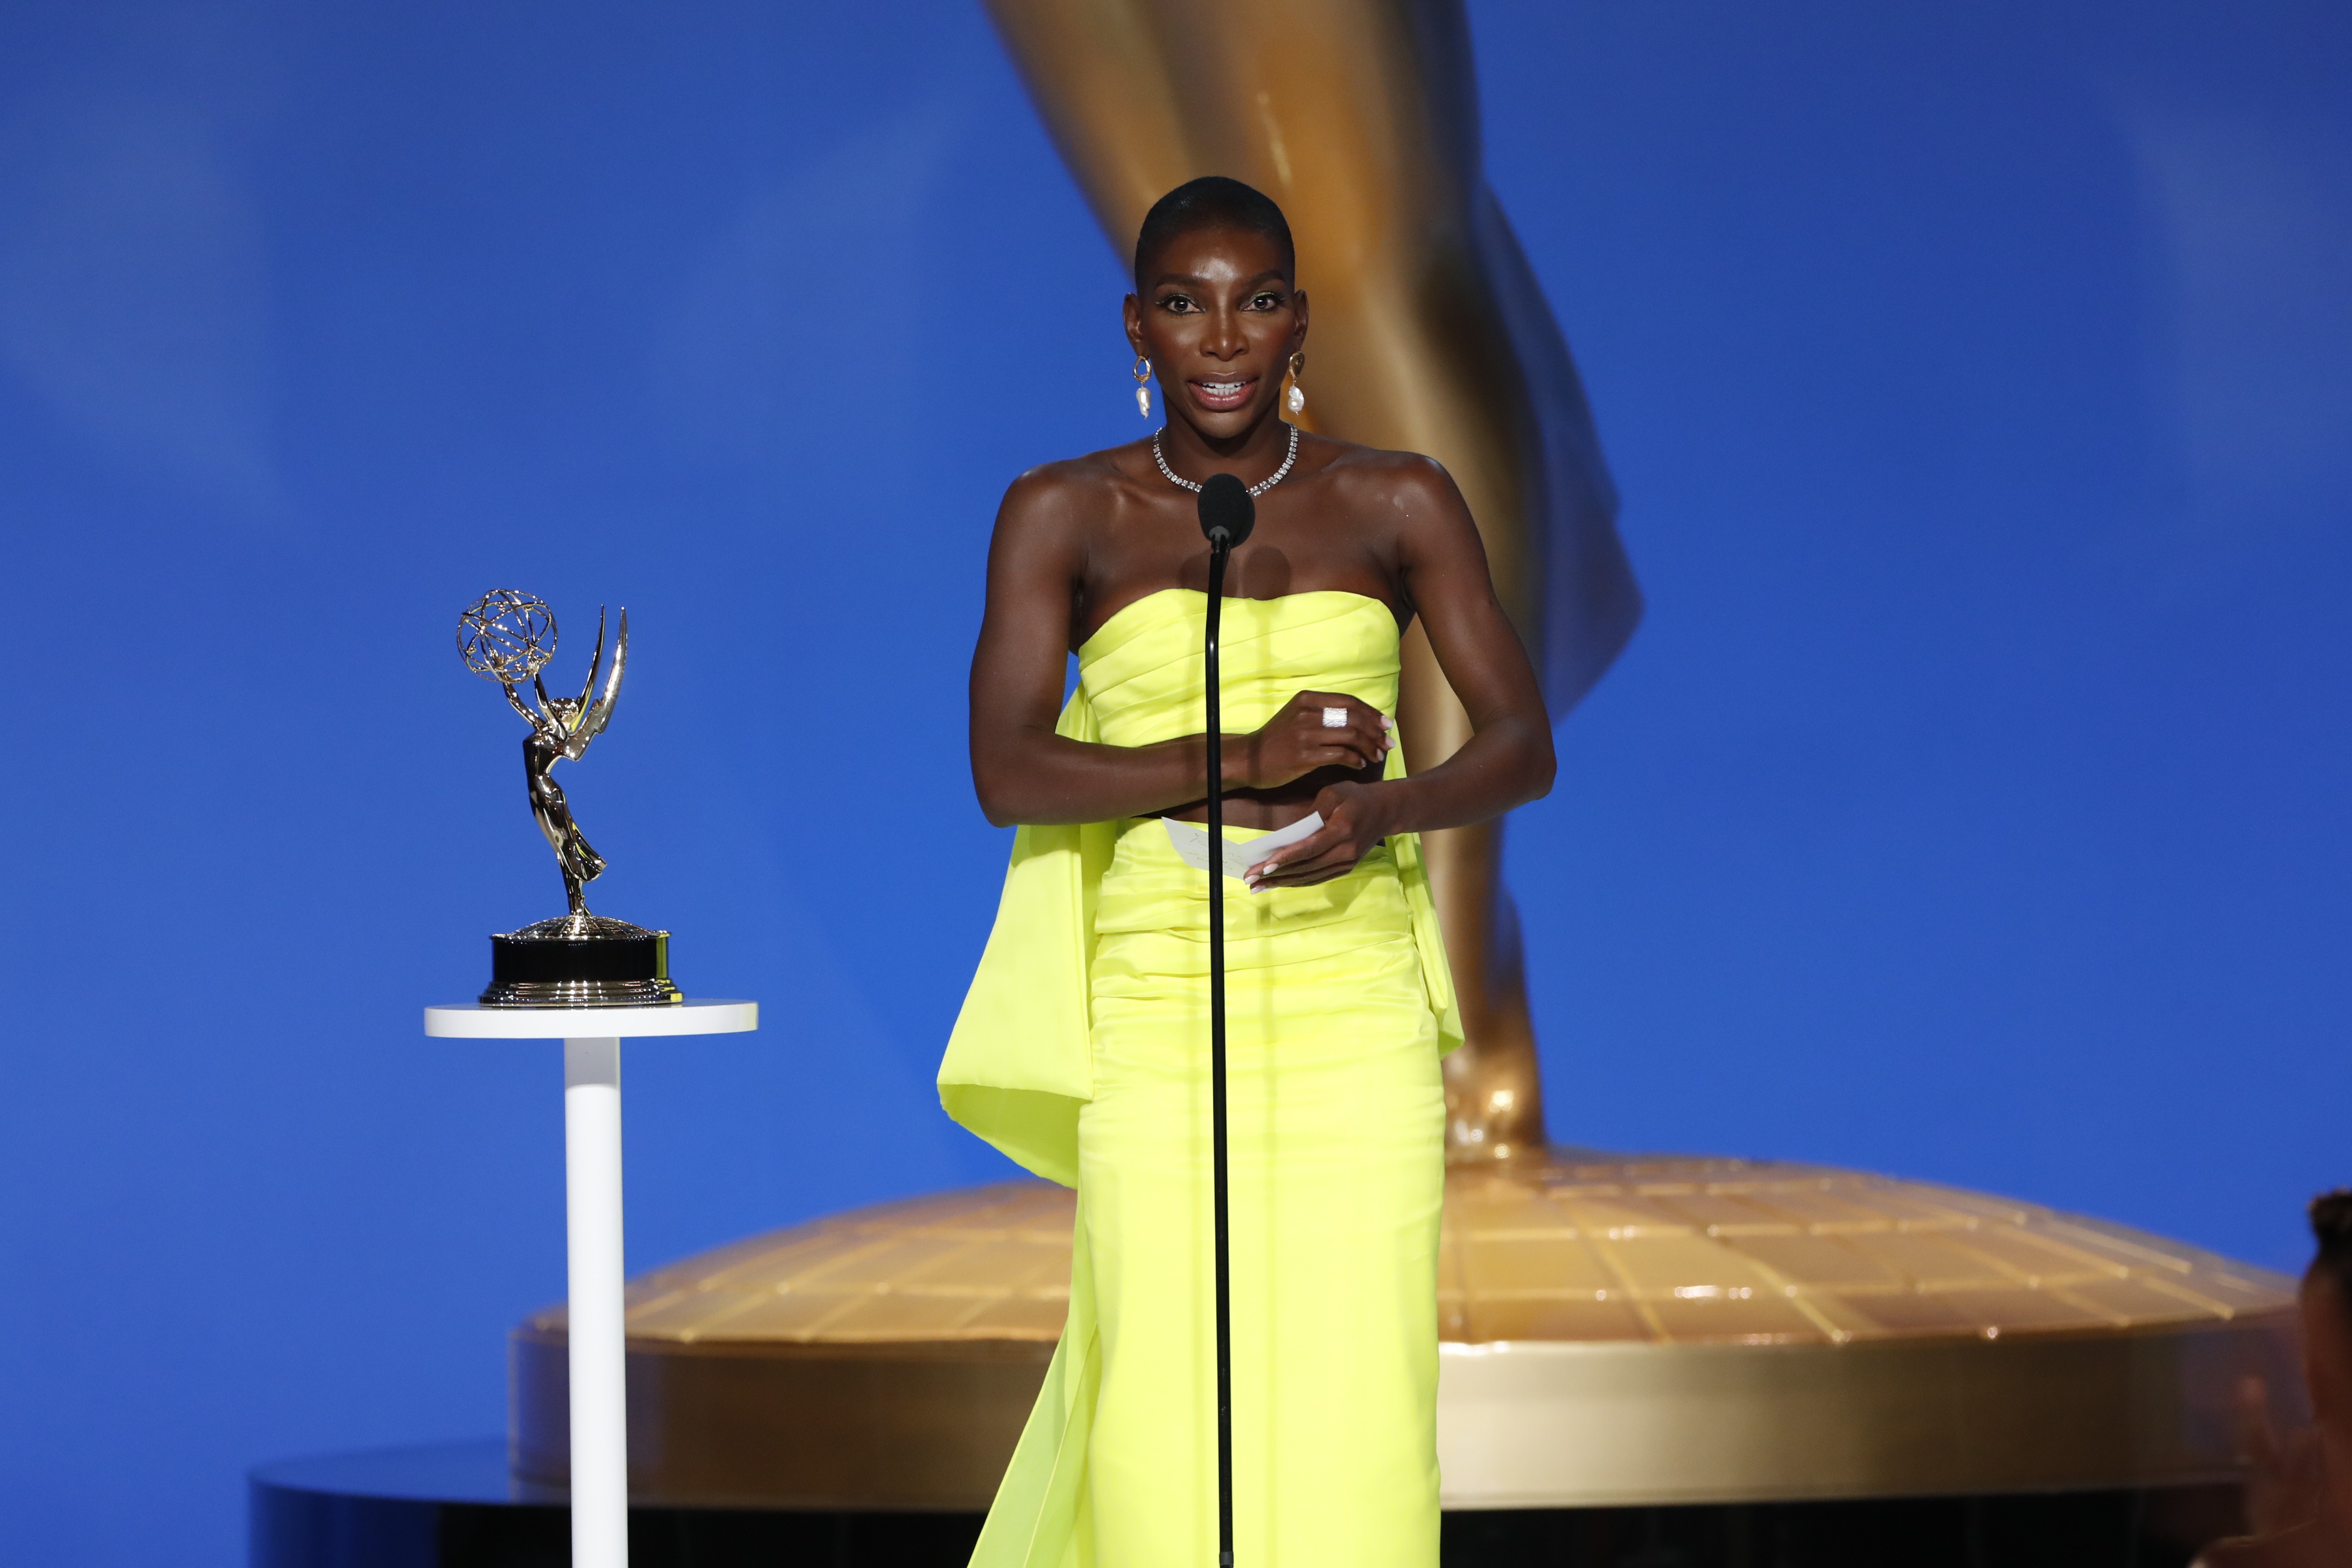 LOS ANGELES - SEPTEMBER 19: Michaela Coel from 'I May Destroy You' appears at the 73RD EMMY AWARDS, broadcast Sunday, Sept. 19 (8:00-11:00 PM, live ET/5:00-8:00 PM, live PT) on the CBS Television Network and available to stream live and on demand on Param (Foto: CBS via Getty Images)